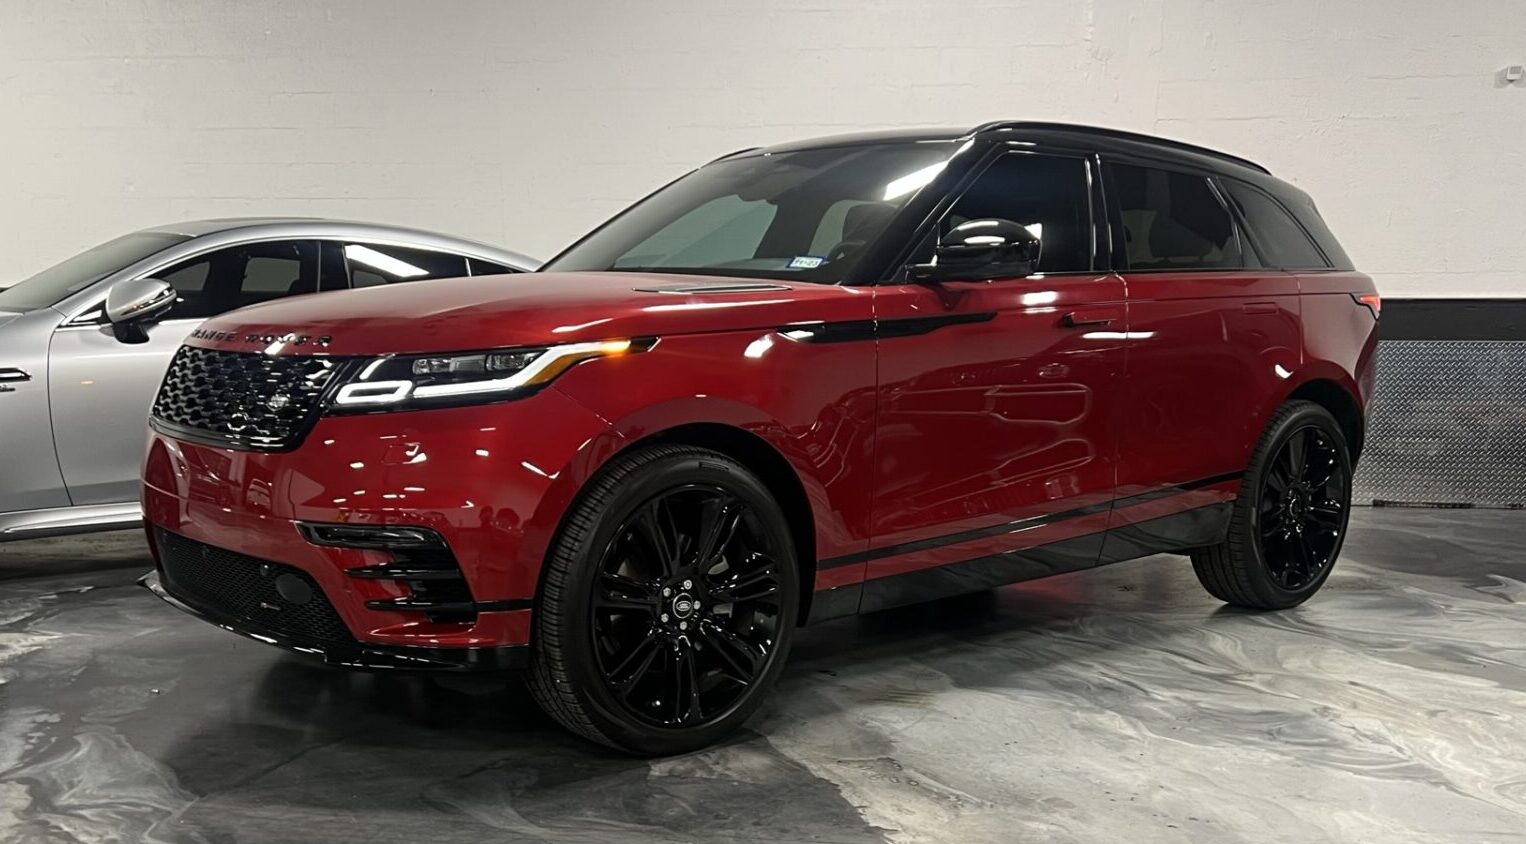 Range Rover Velar Red on Black exotic rental cars yacht charters Miami